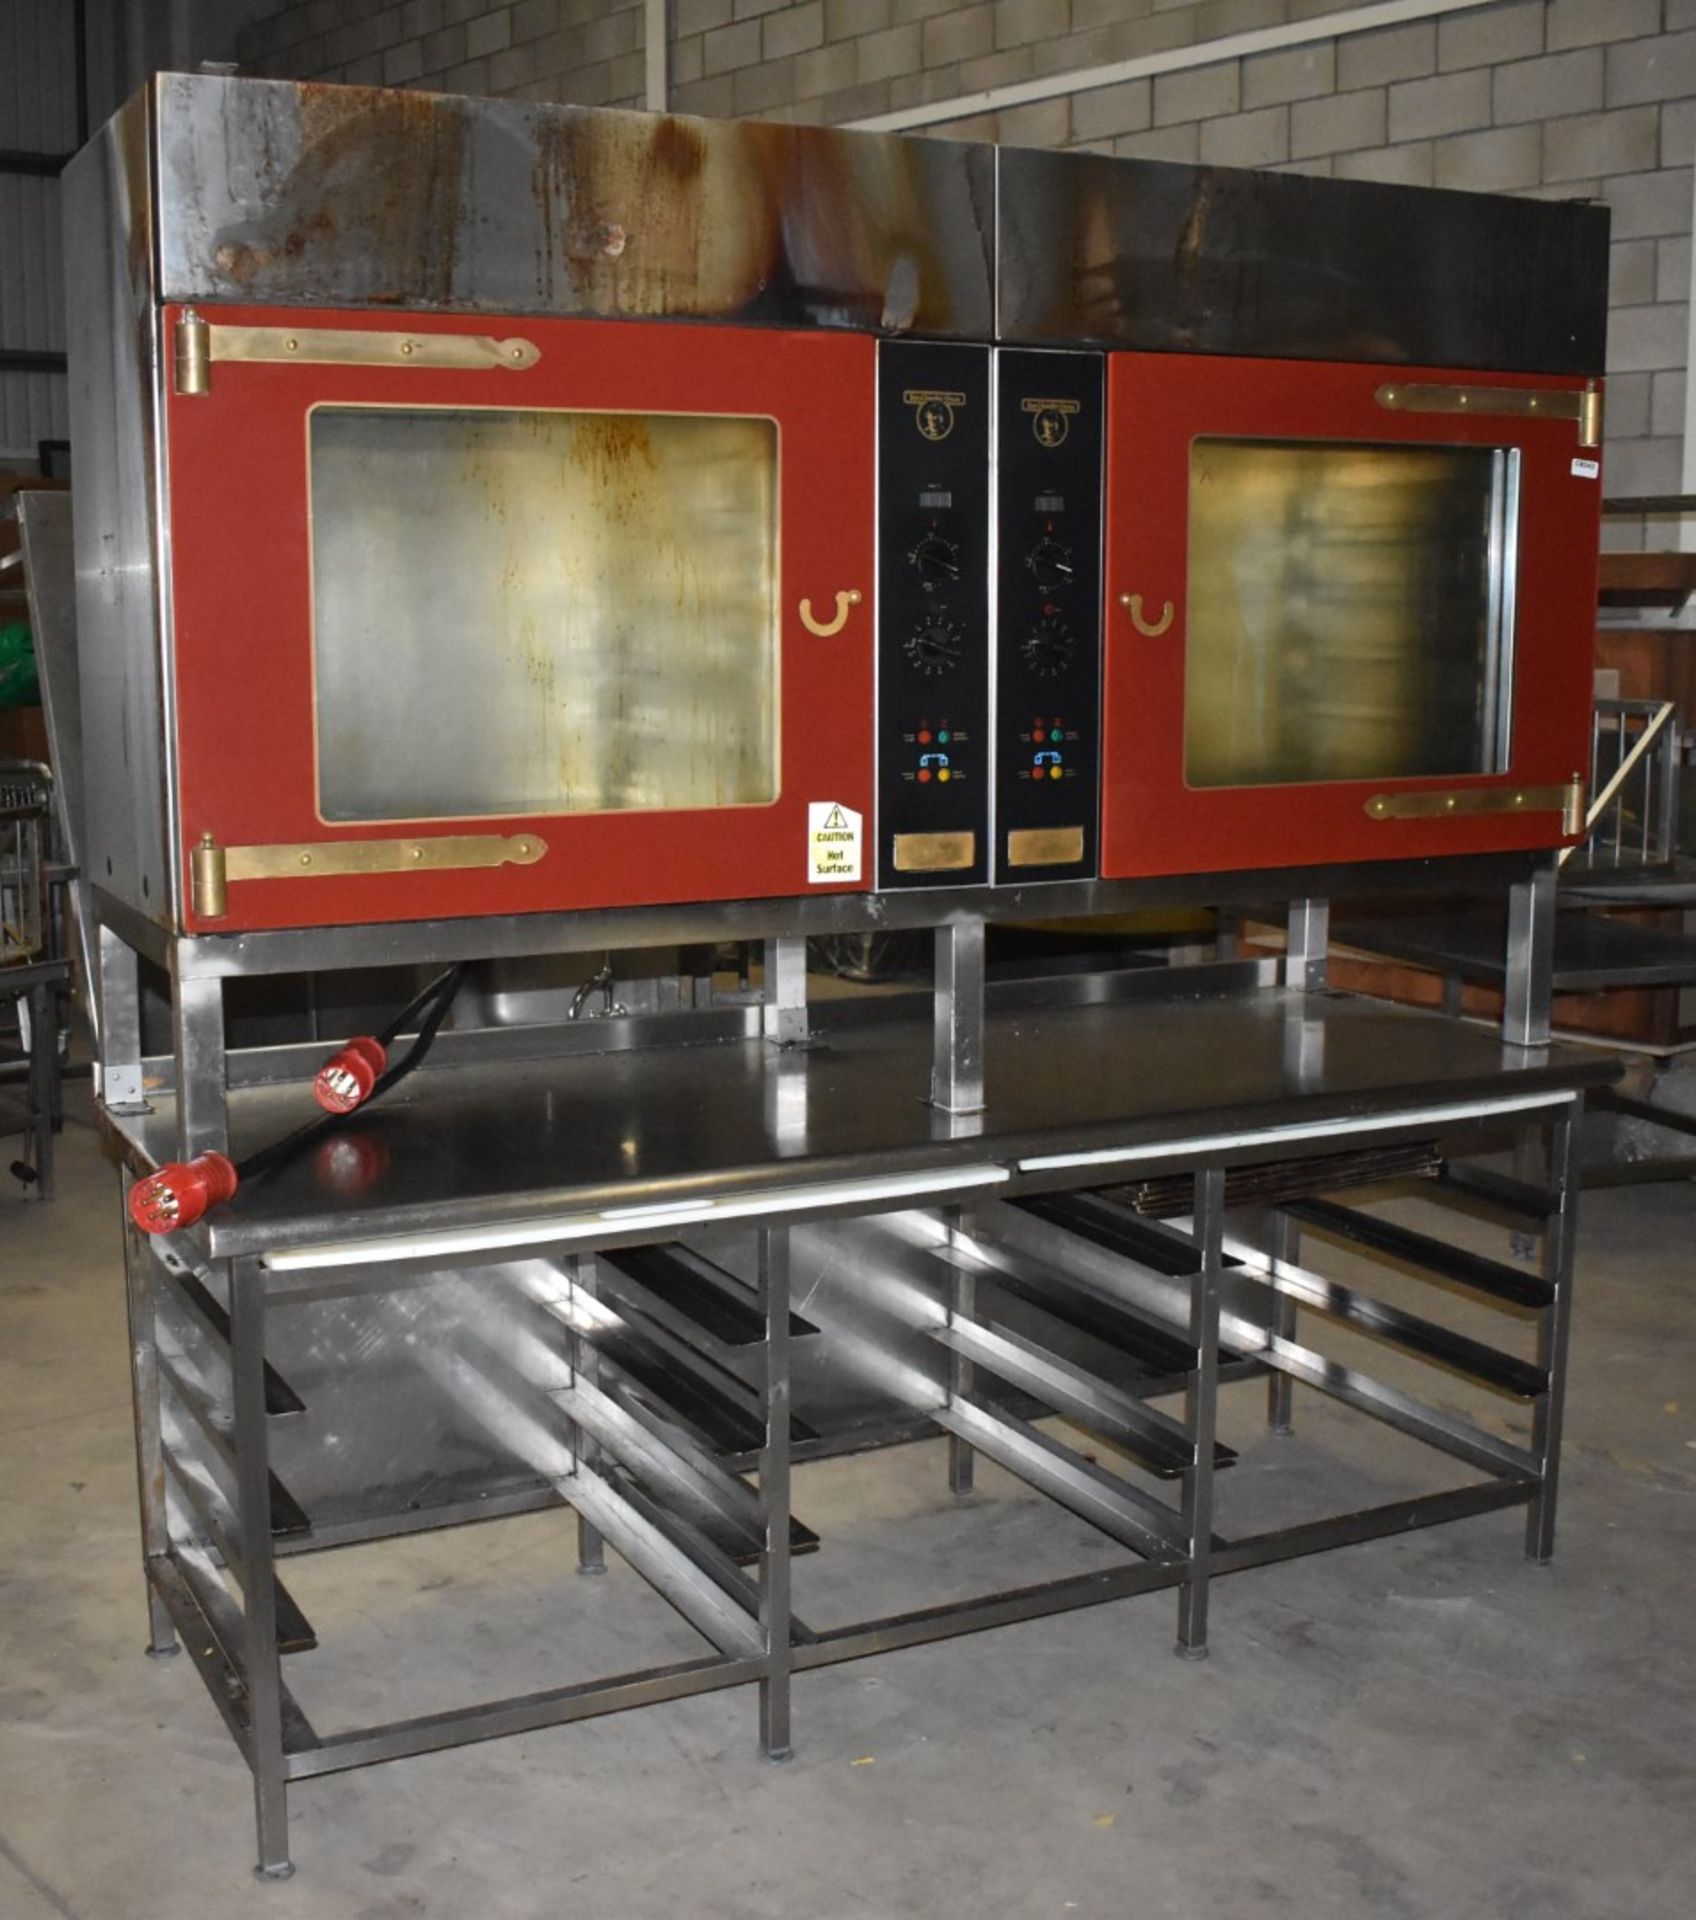 1 x Tom Chandley Double C5 60X40 Pie Oven With Stainless Steel Baking Tray Prep Bench - CL455 - - Image 8 of 18